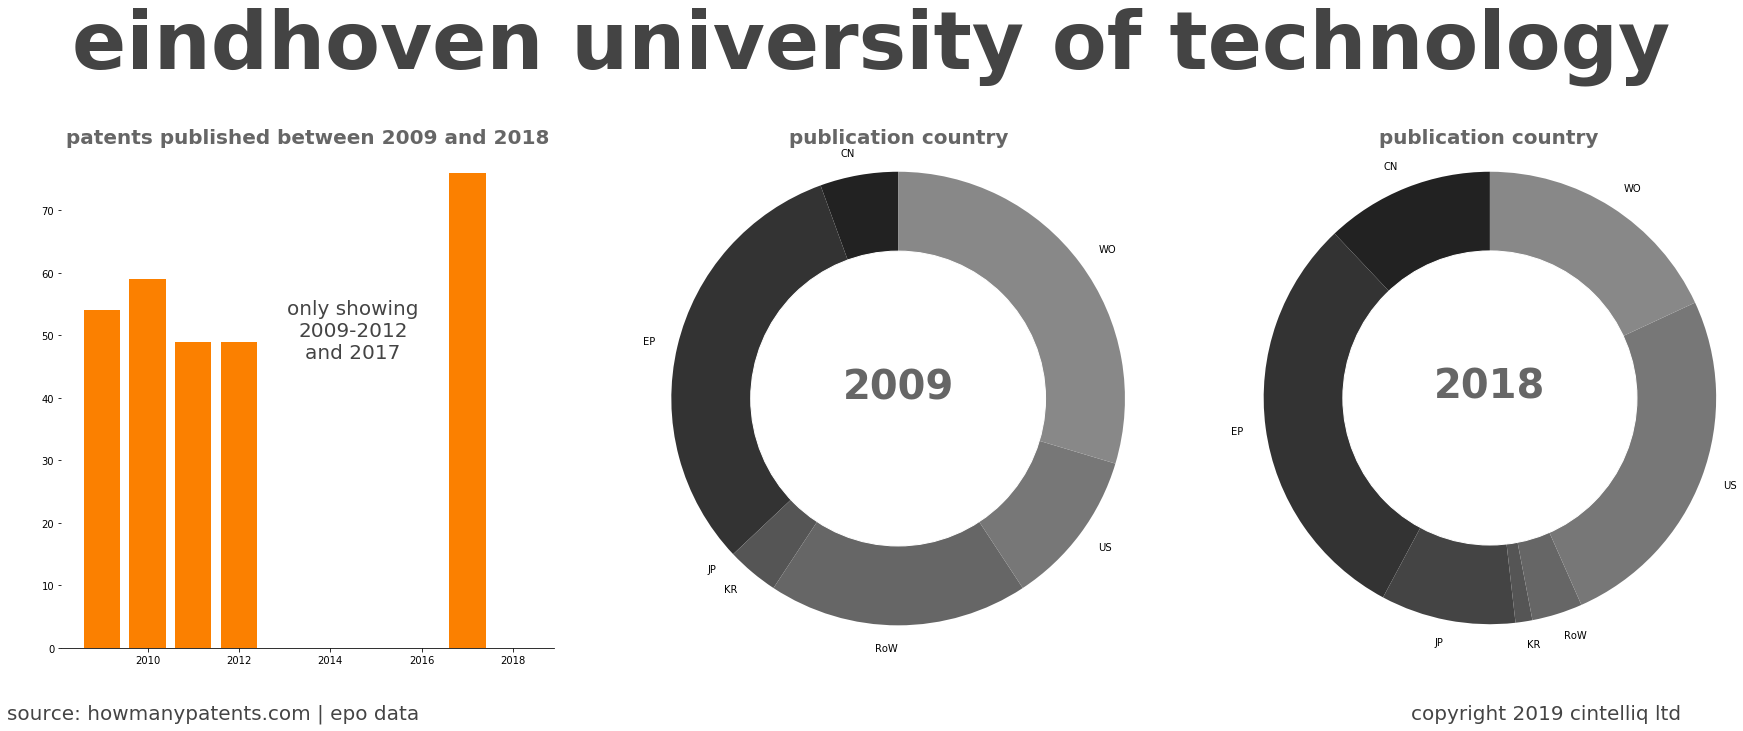 summary of patents for Eindhoven University Of Technology